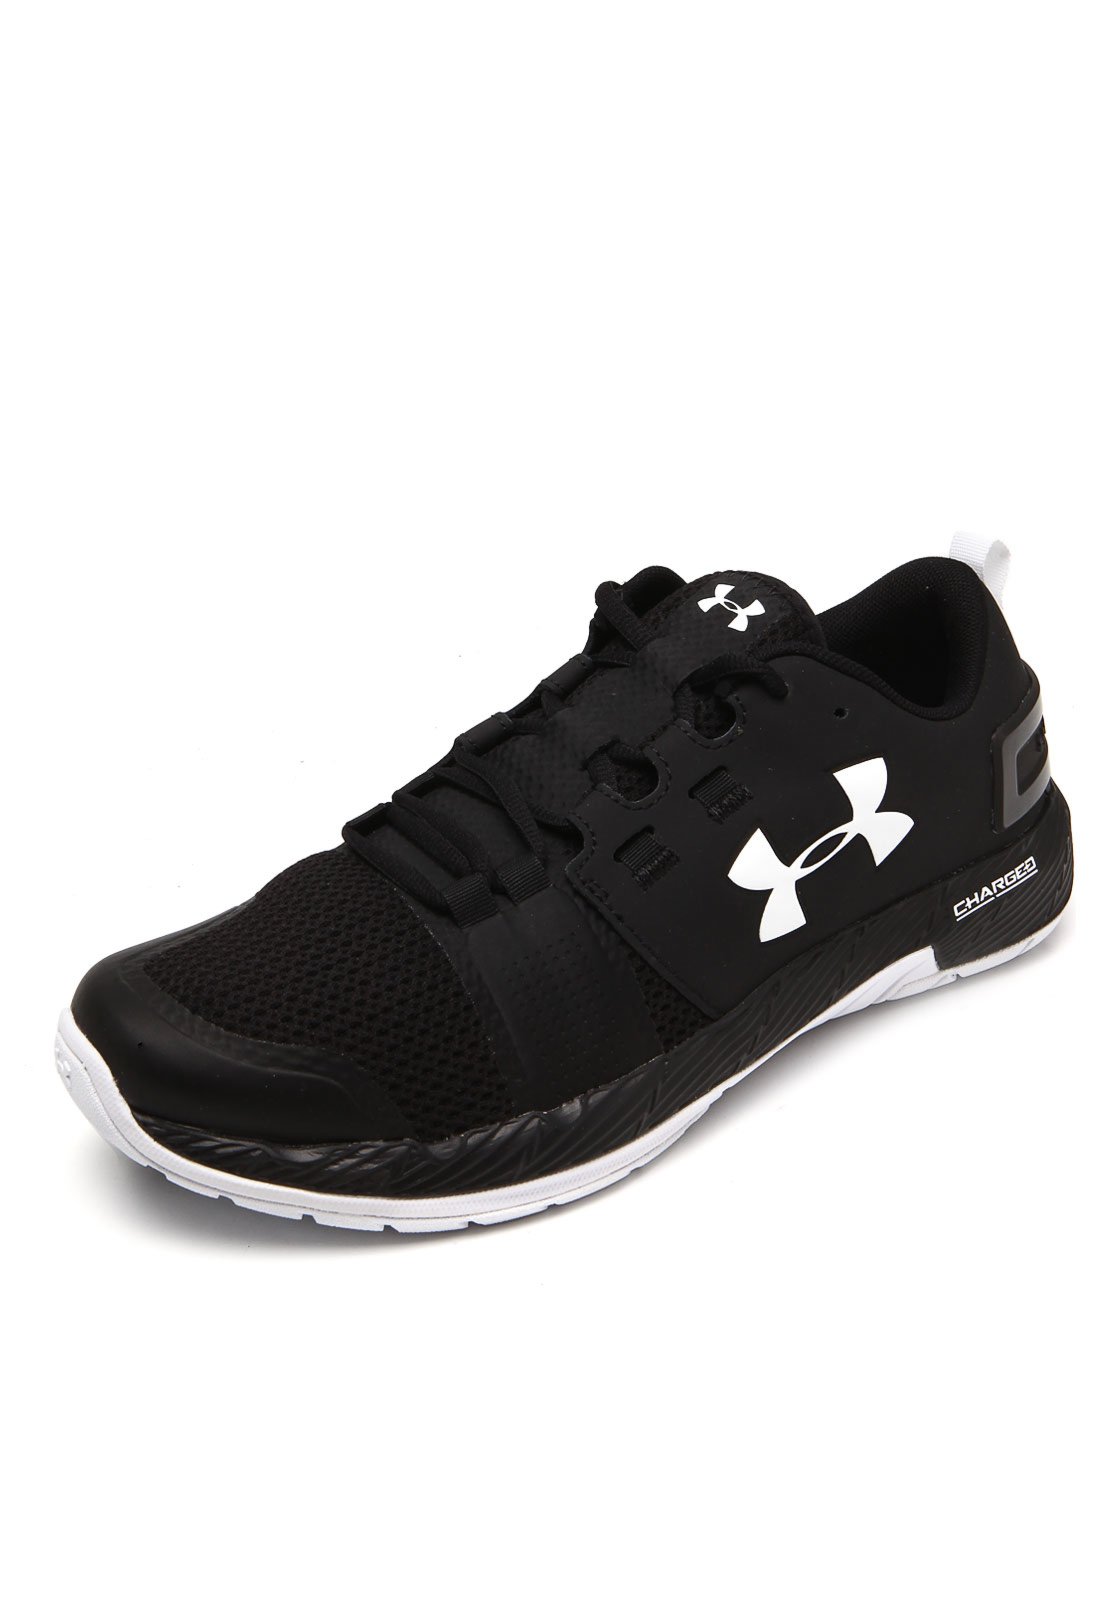 tênis under armour commit masculino